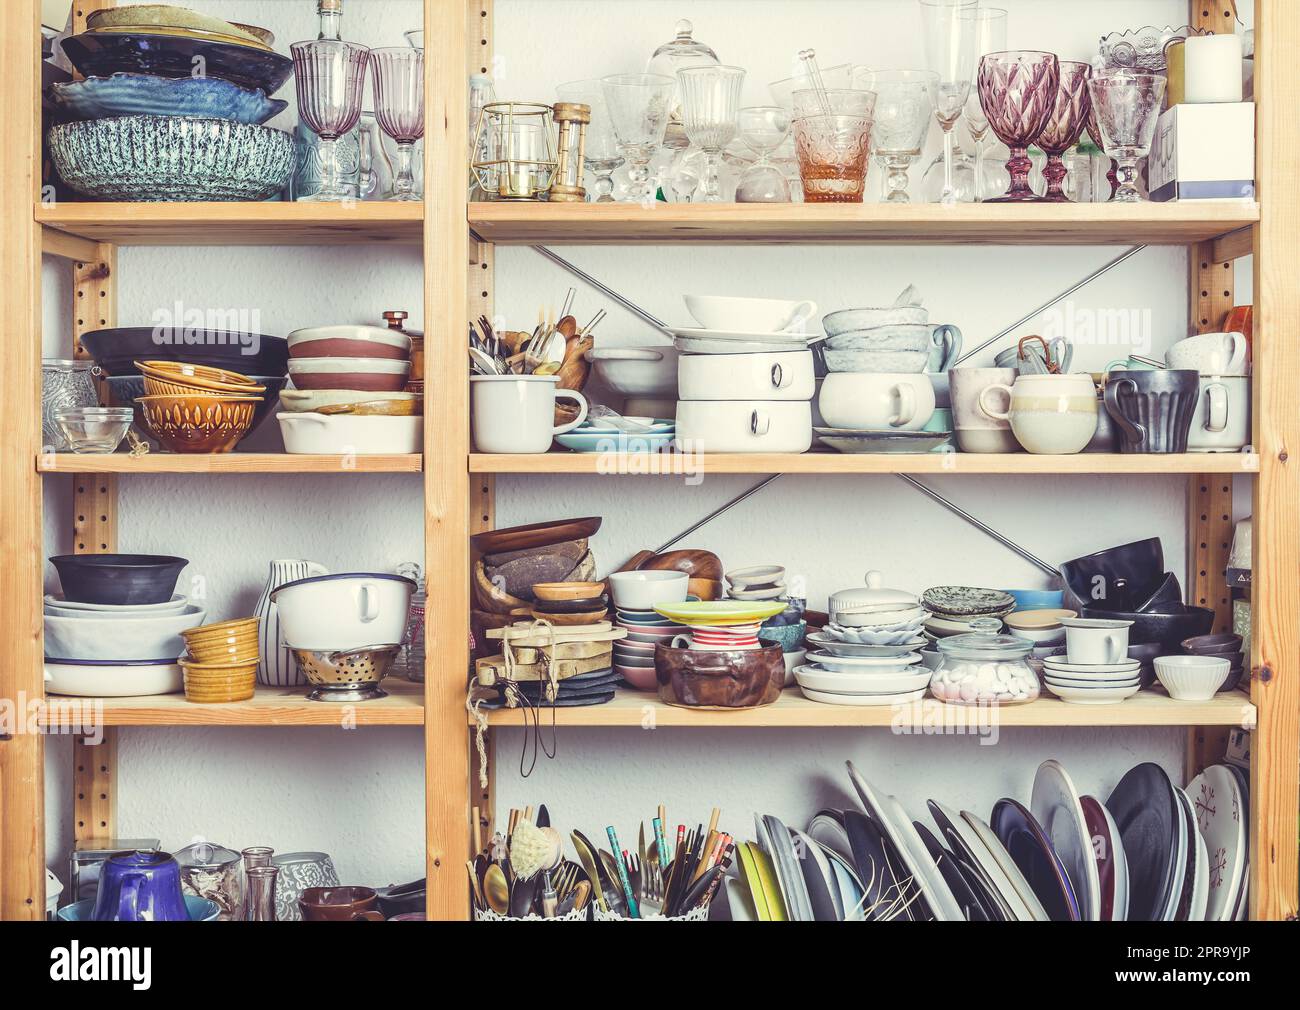 Shelves with kitchen clutter, utensils and kitchenware Stock Photo